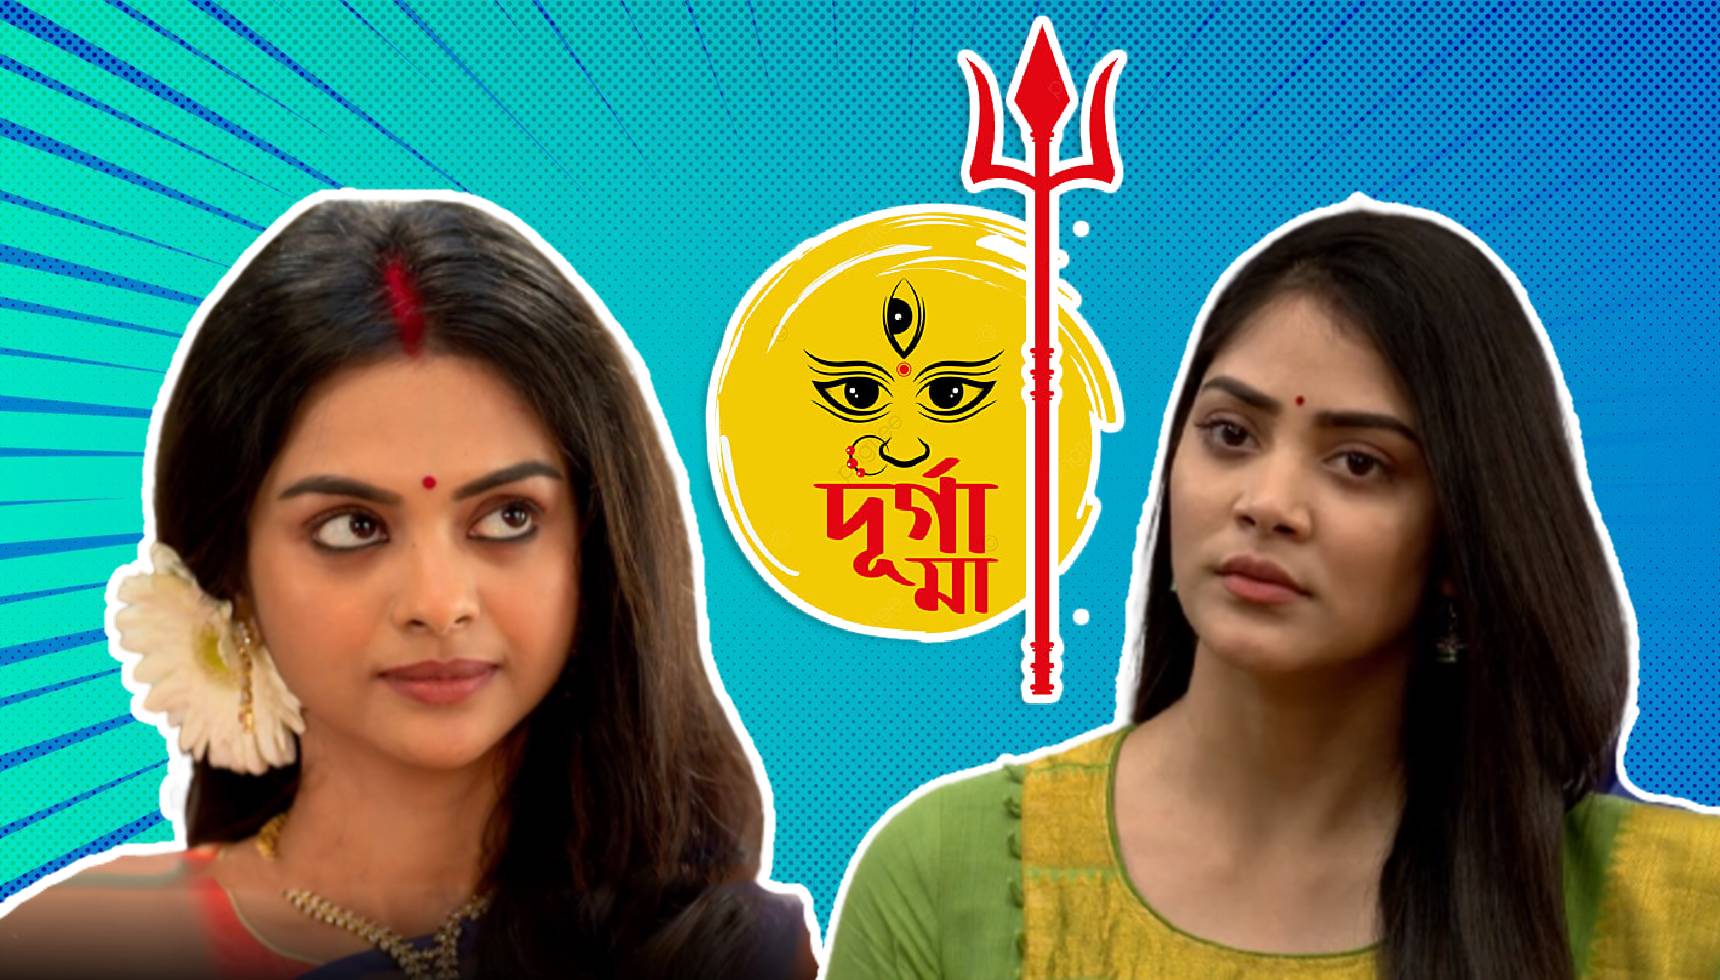 Who will be the Durga of Star Jalsha Here is the Mahalaya Promo